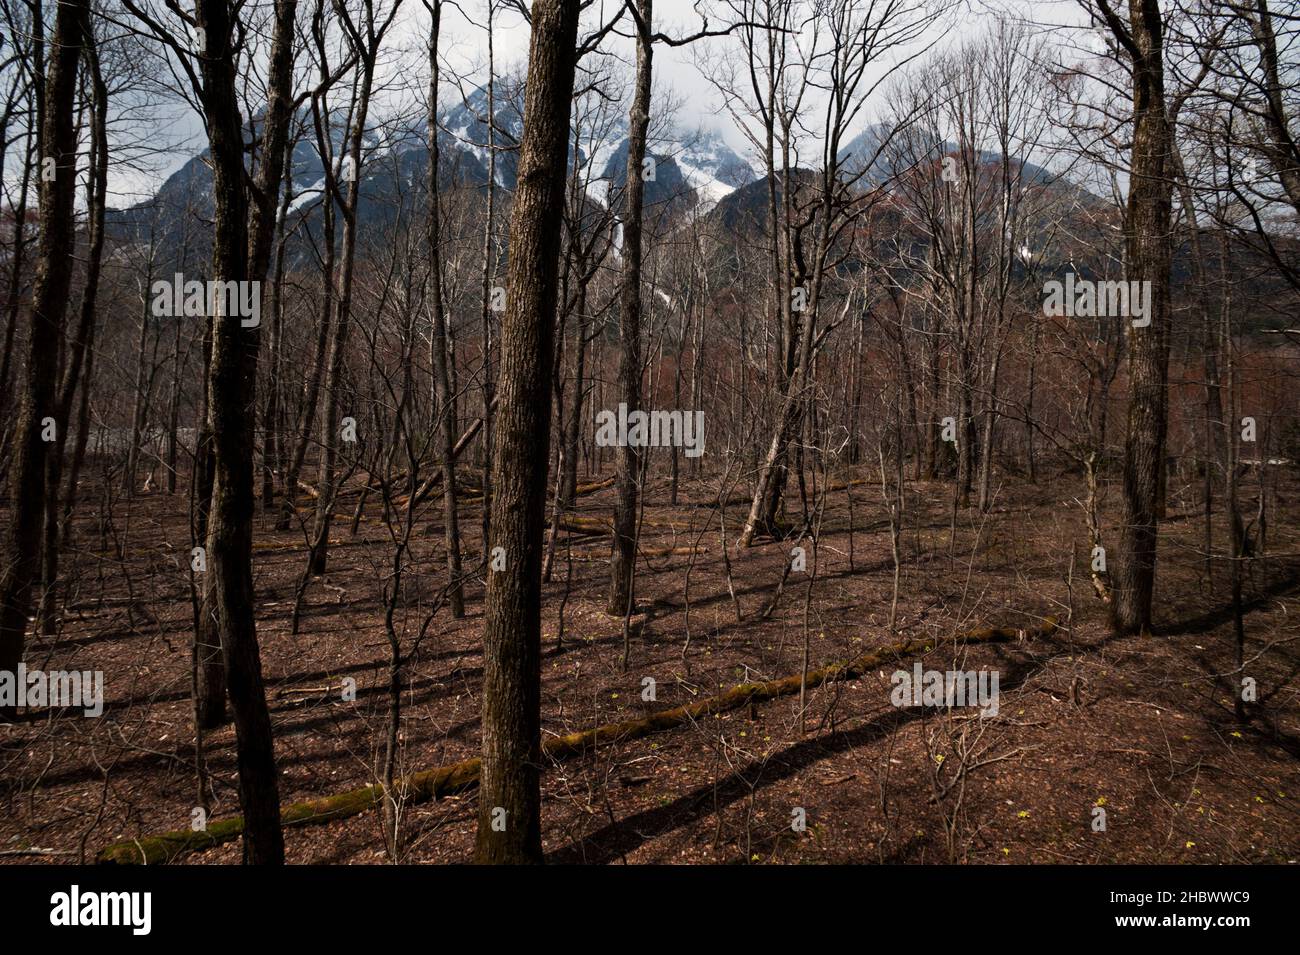 The Hotaka Mountains backdrop the bare trees in early spring in Kamikochi. Stock Photo